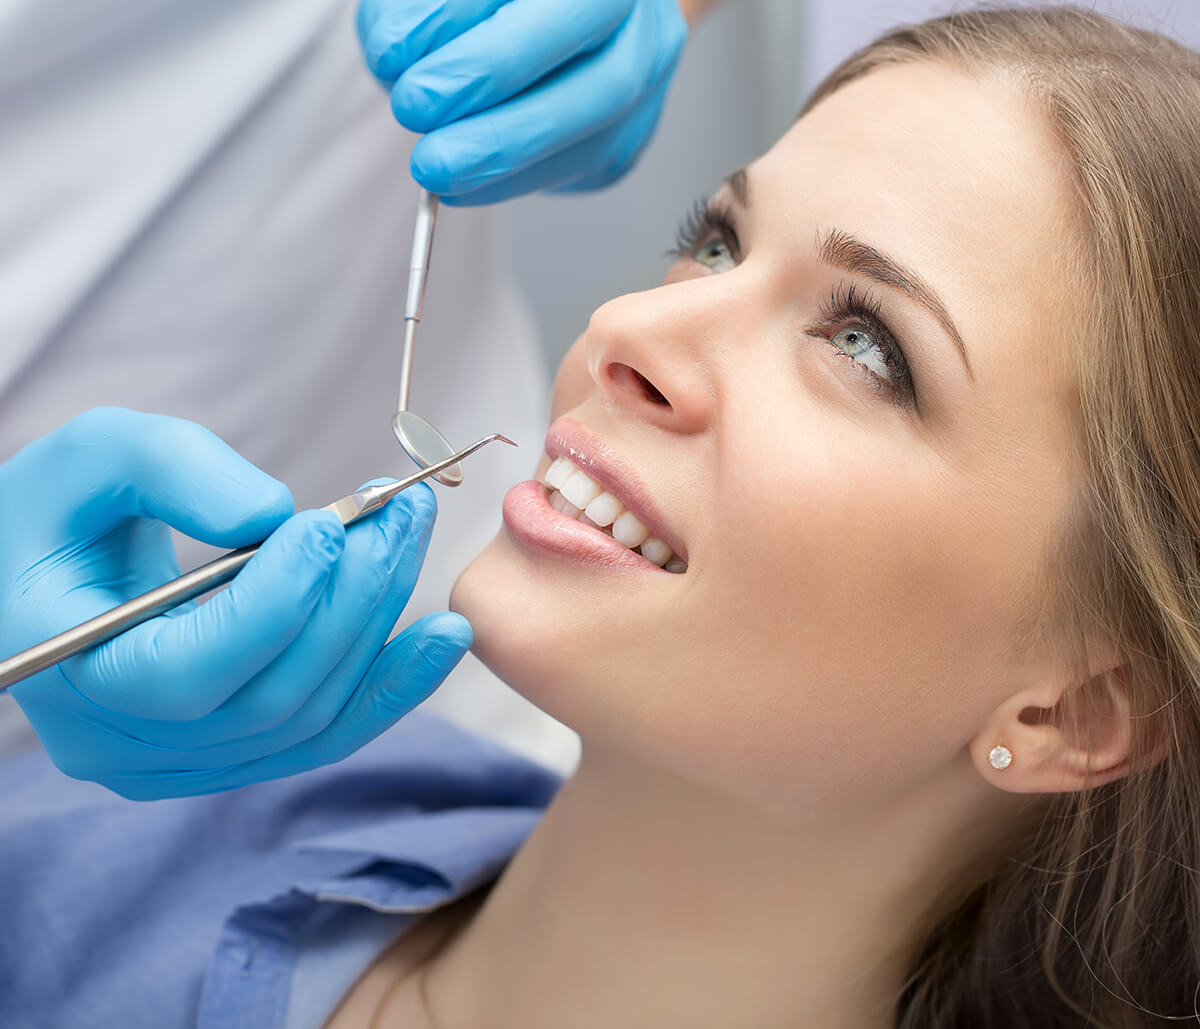 General and Cosmetic Dentist at Dentistry at LaSalle in Aldershot Area